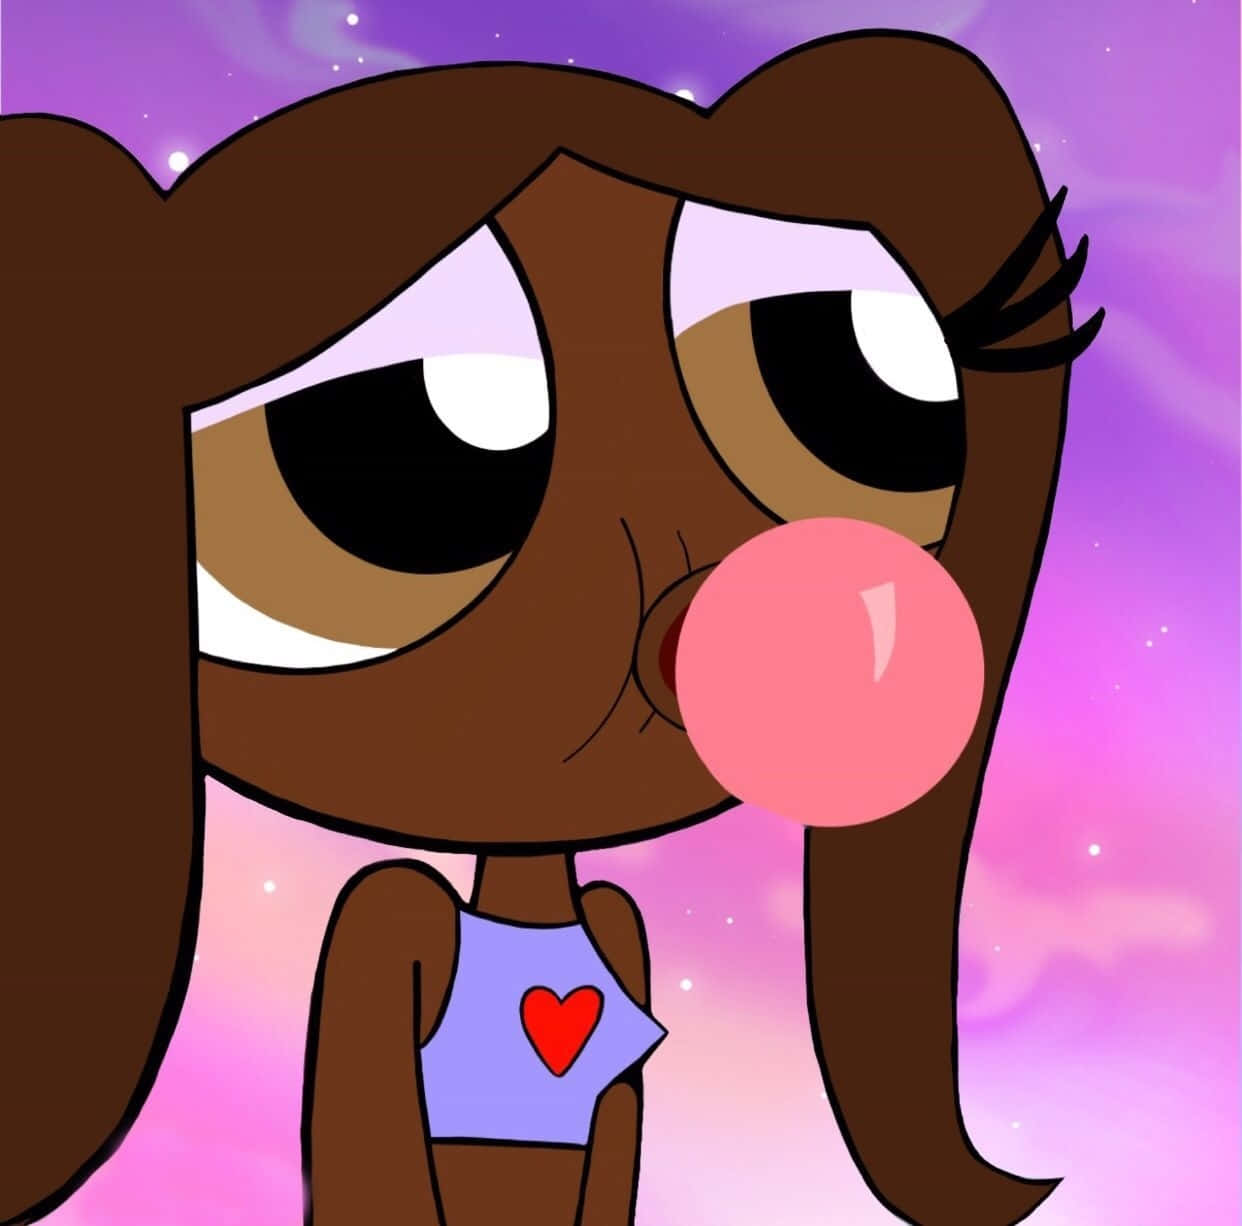 A Cartoon Girl Blowing Bubbles With A Heart On Her Face